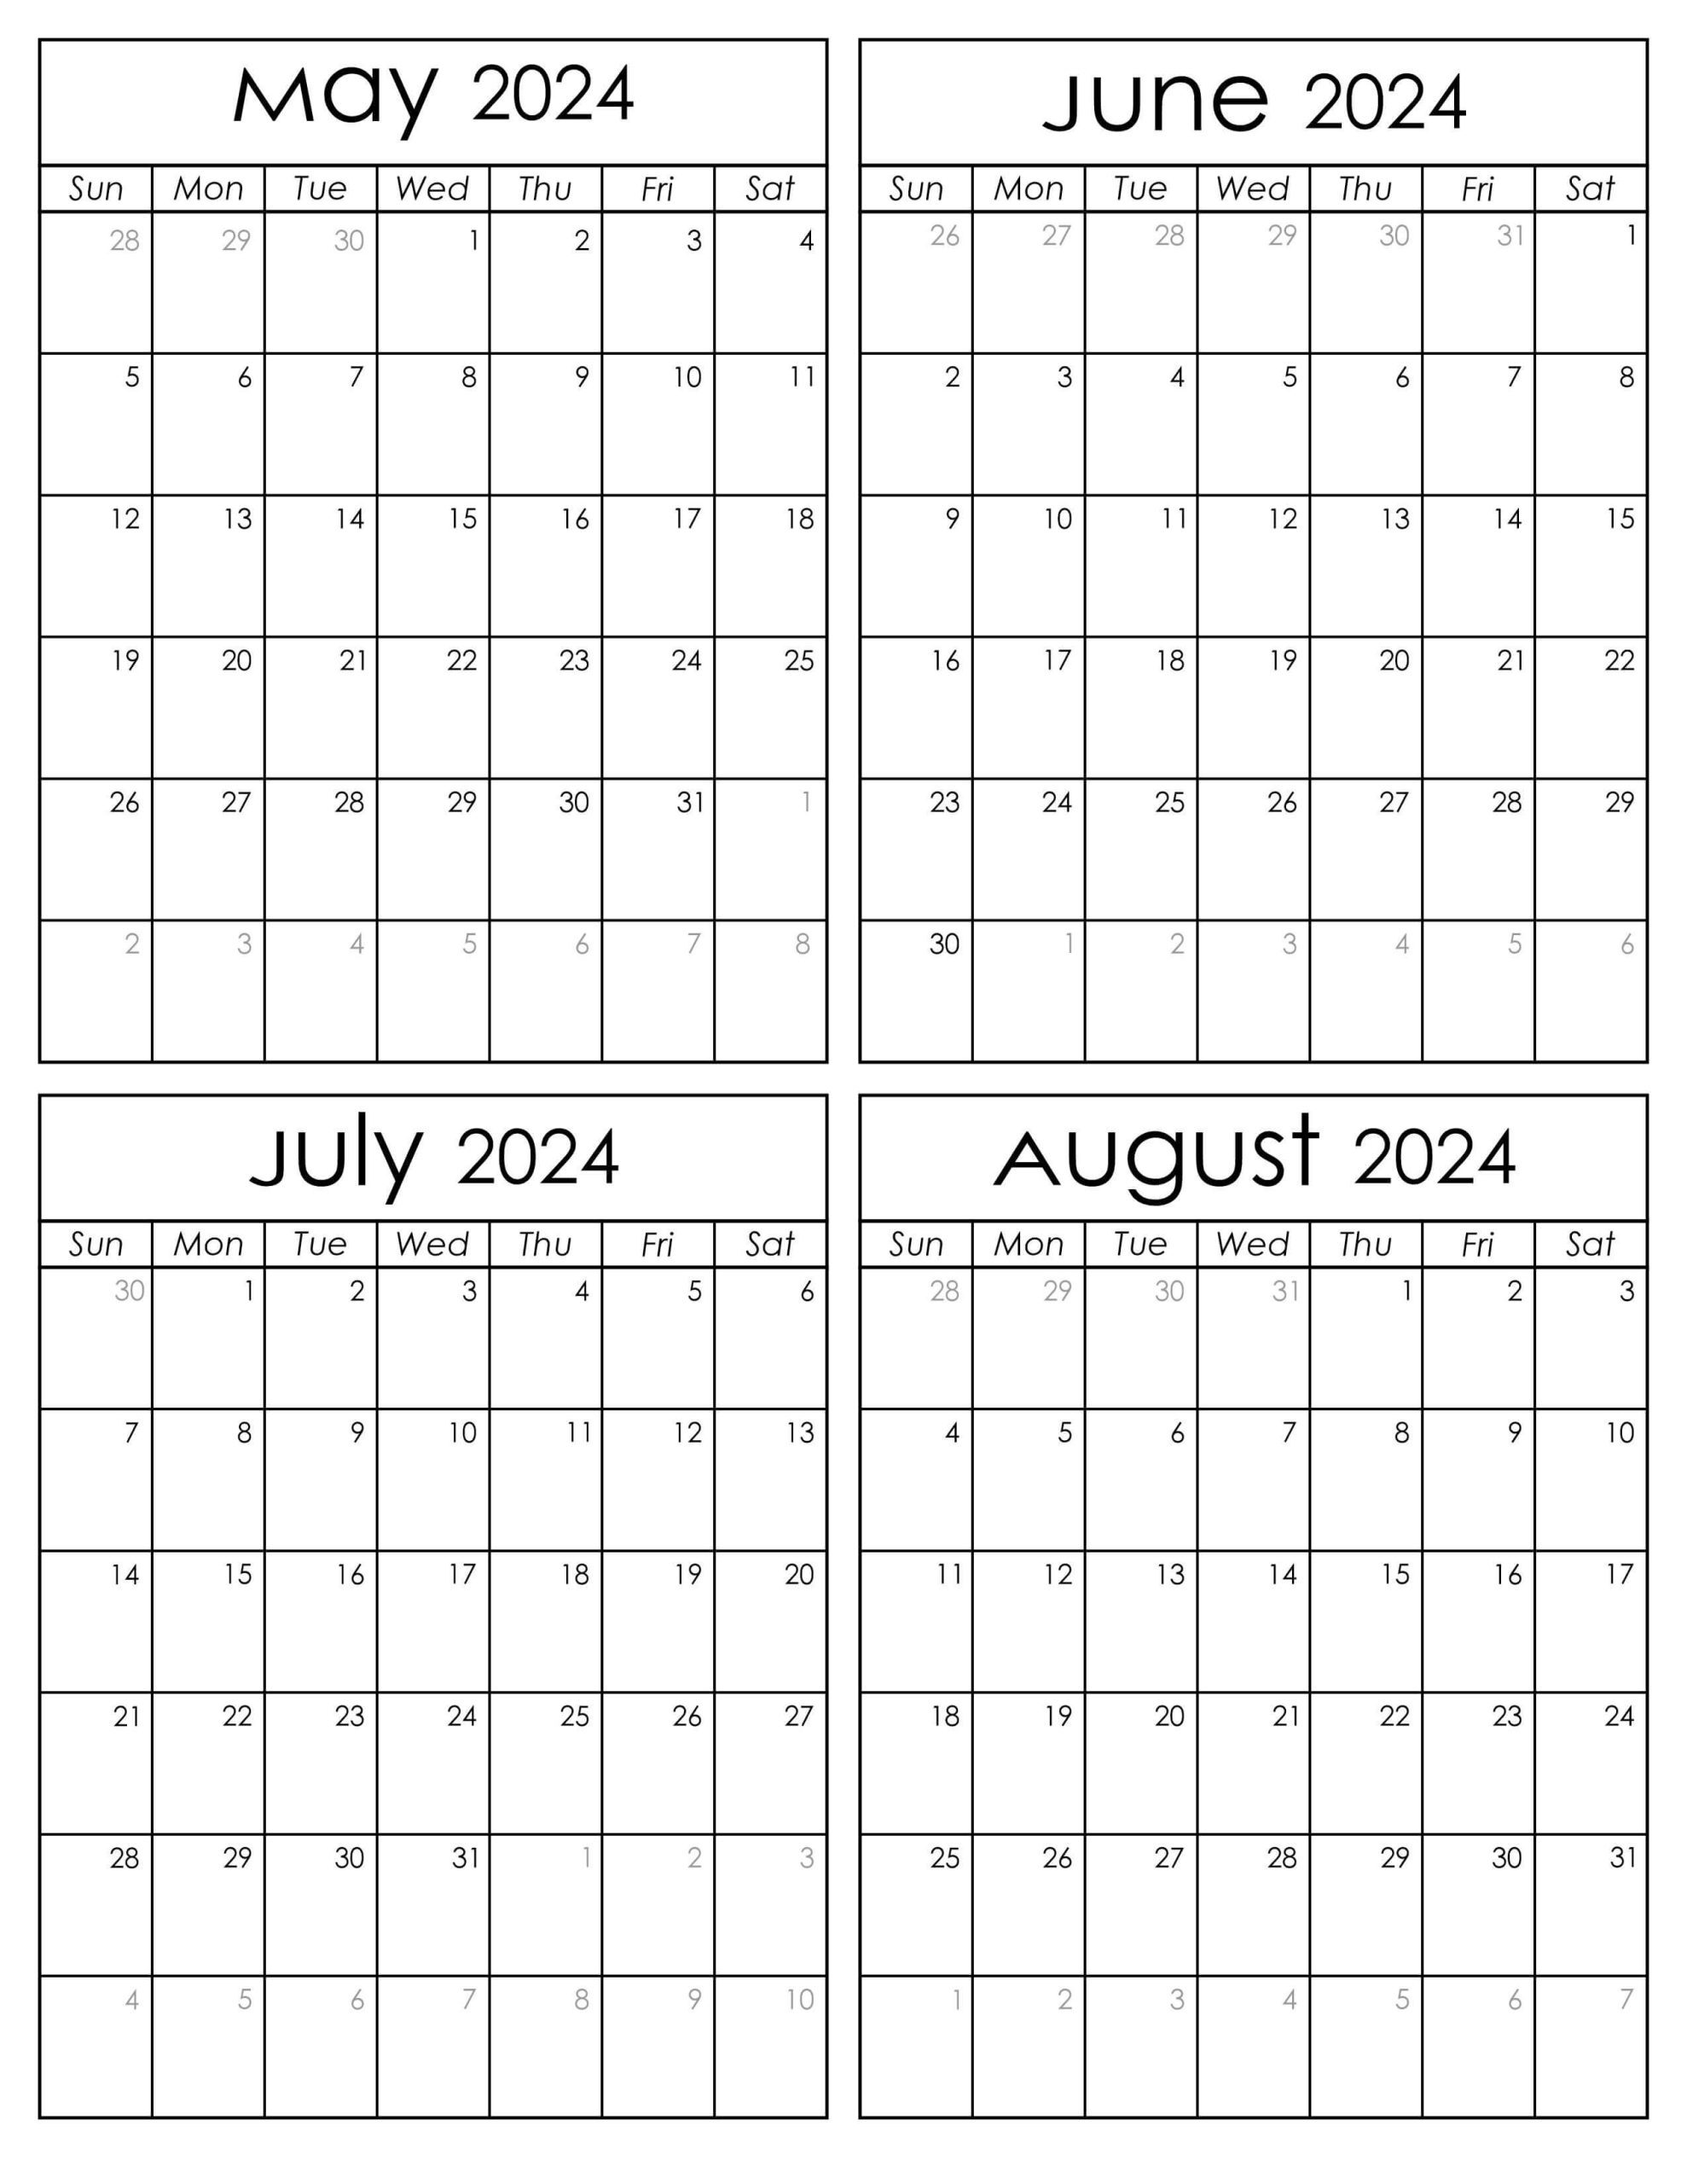 Printable May to August 2024 Calendars